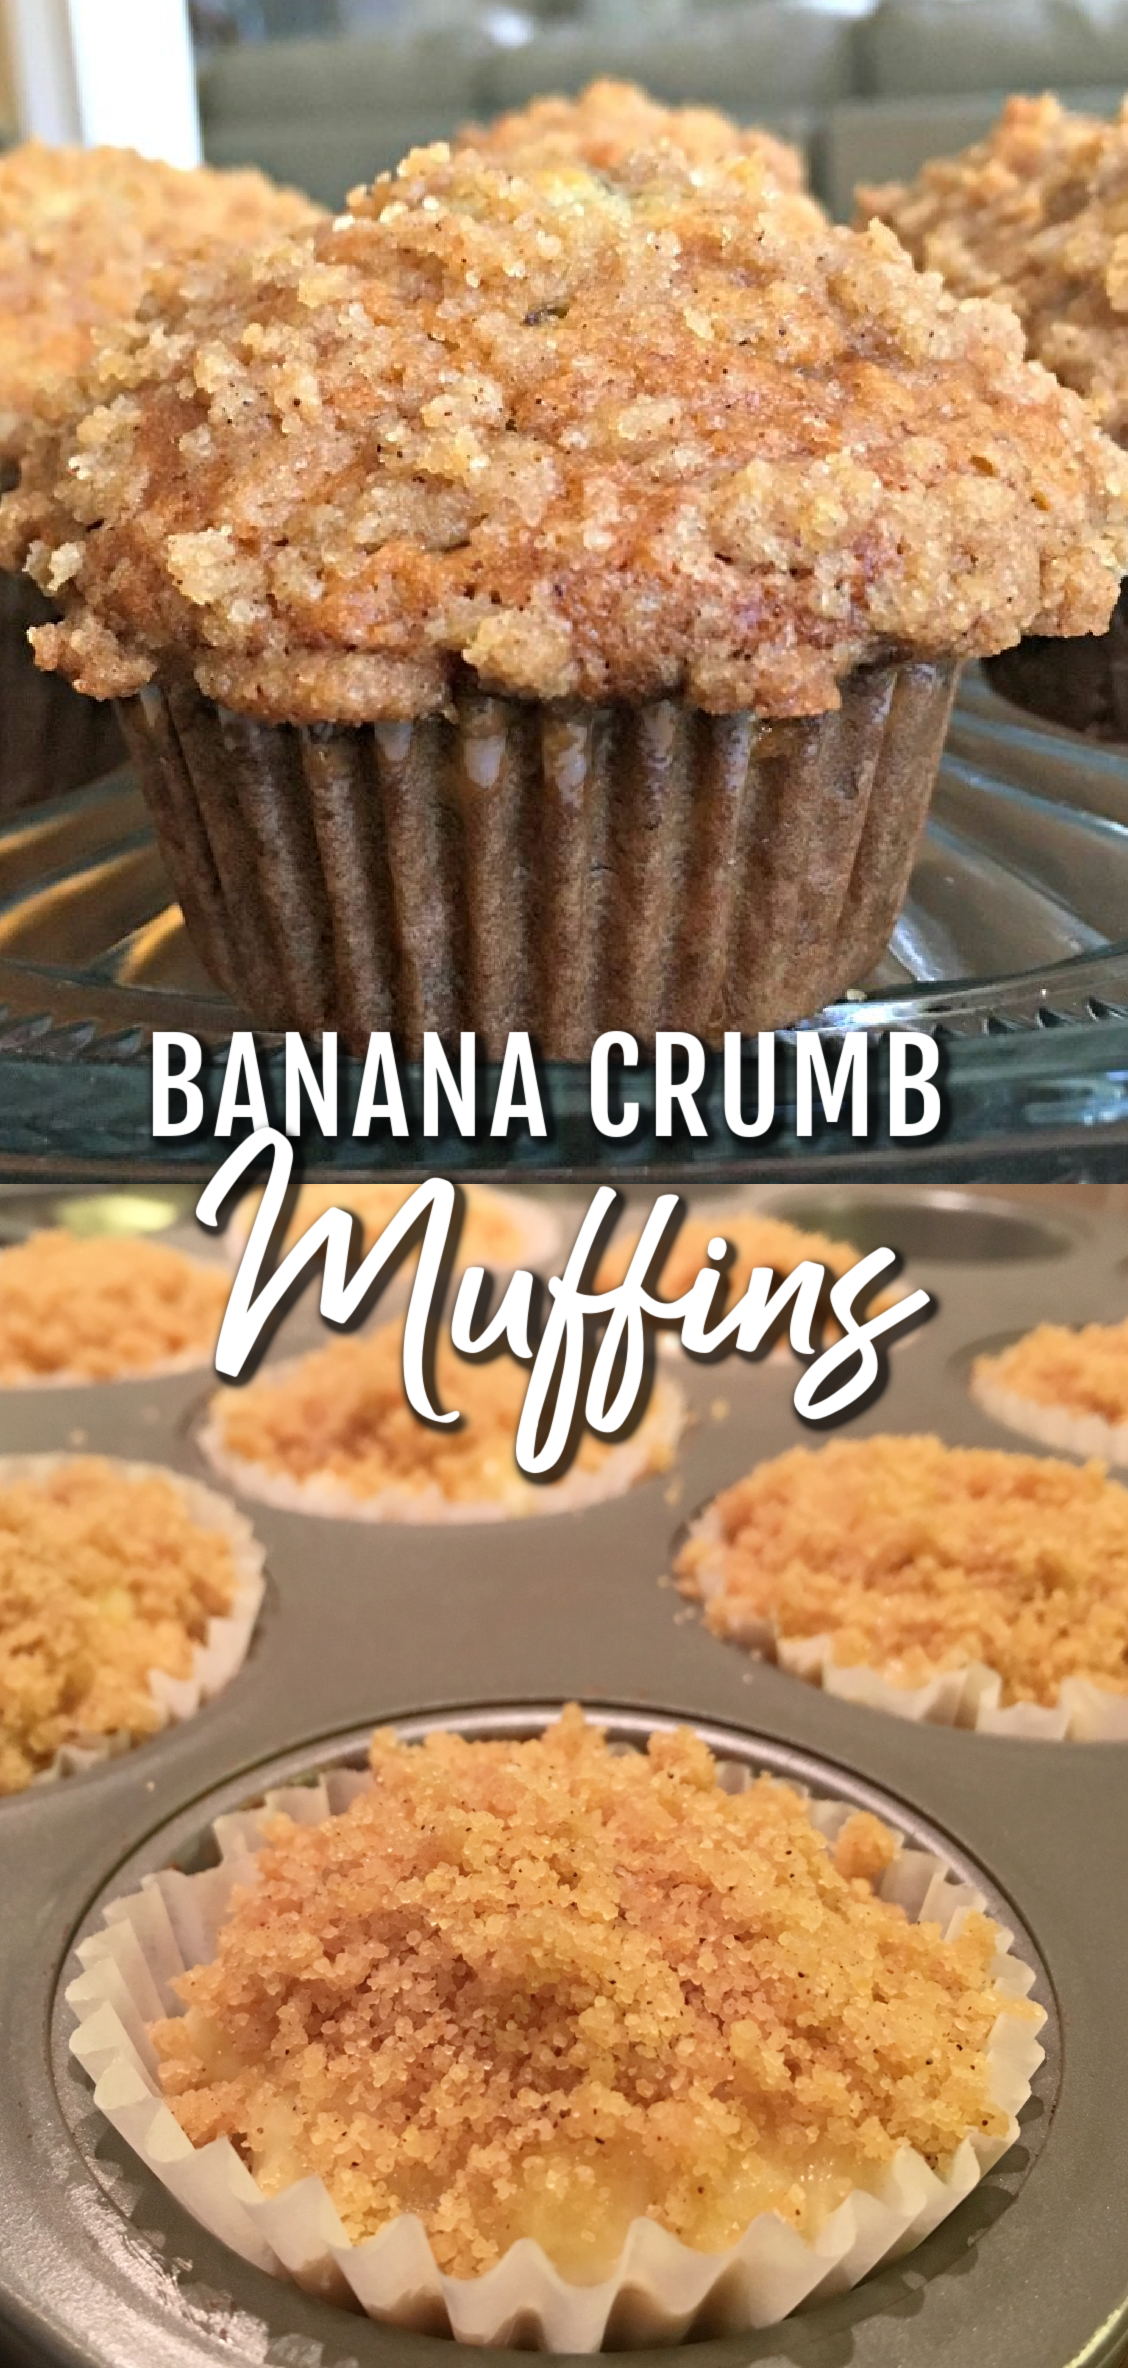 This is a two image collage. The top photo shows a banana muffin on a plate. The bottom photo shows a muffin pan with filled with banana muffin batter, ready to bake.